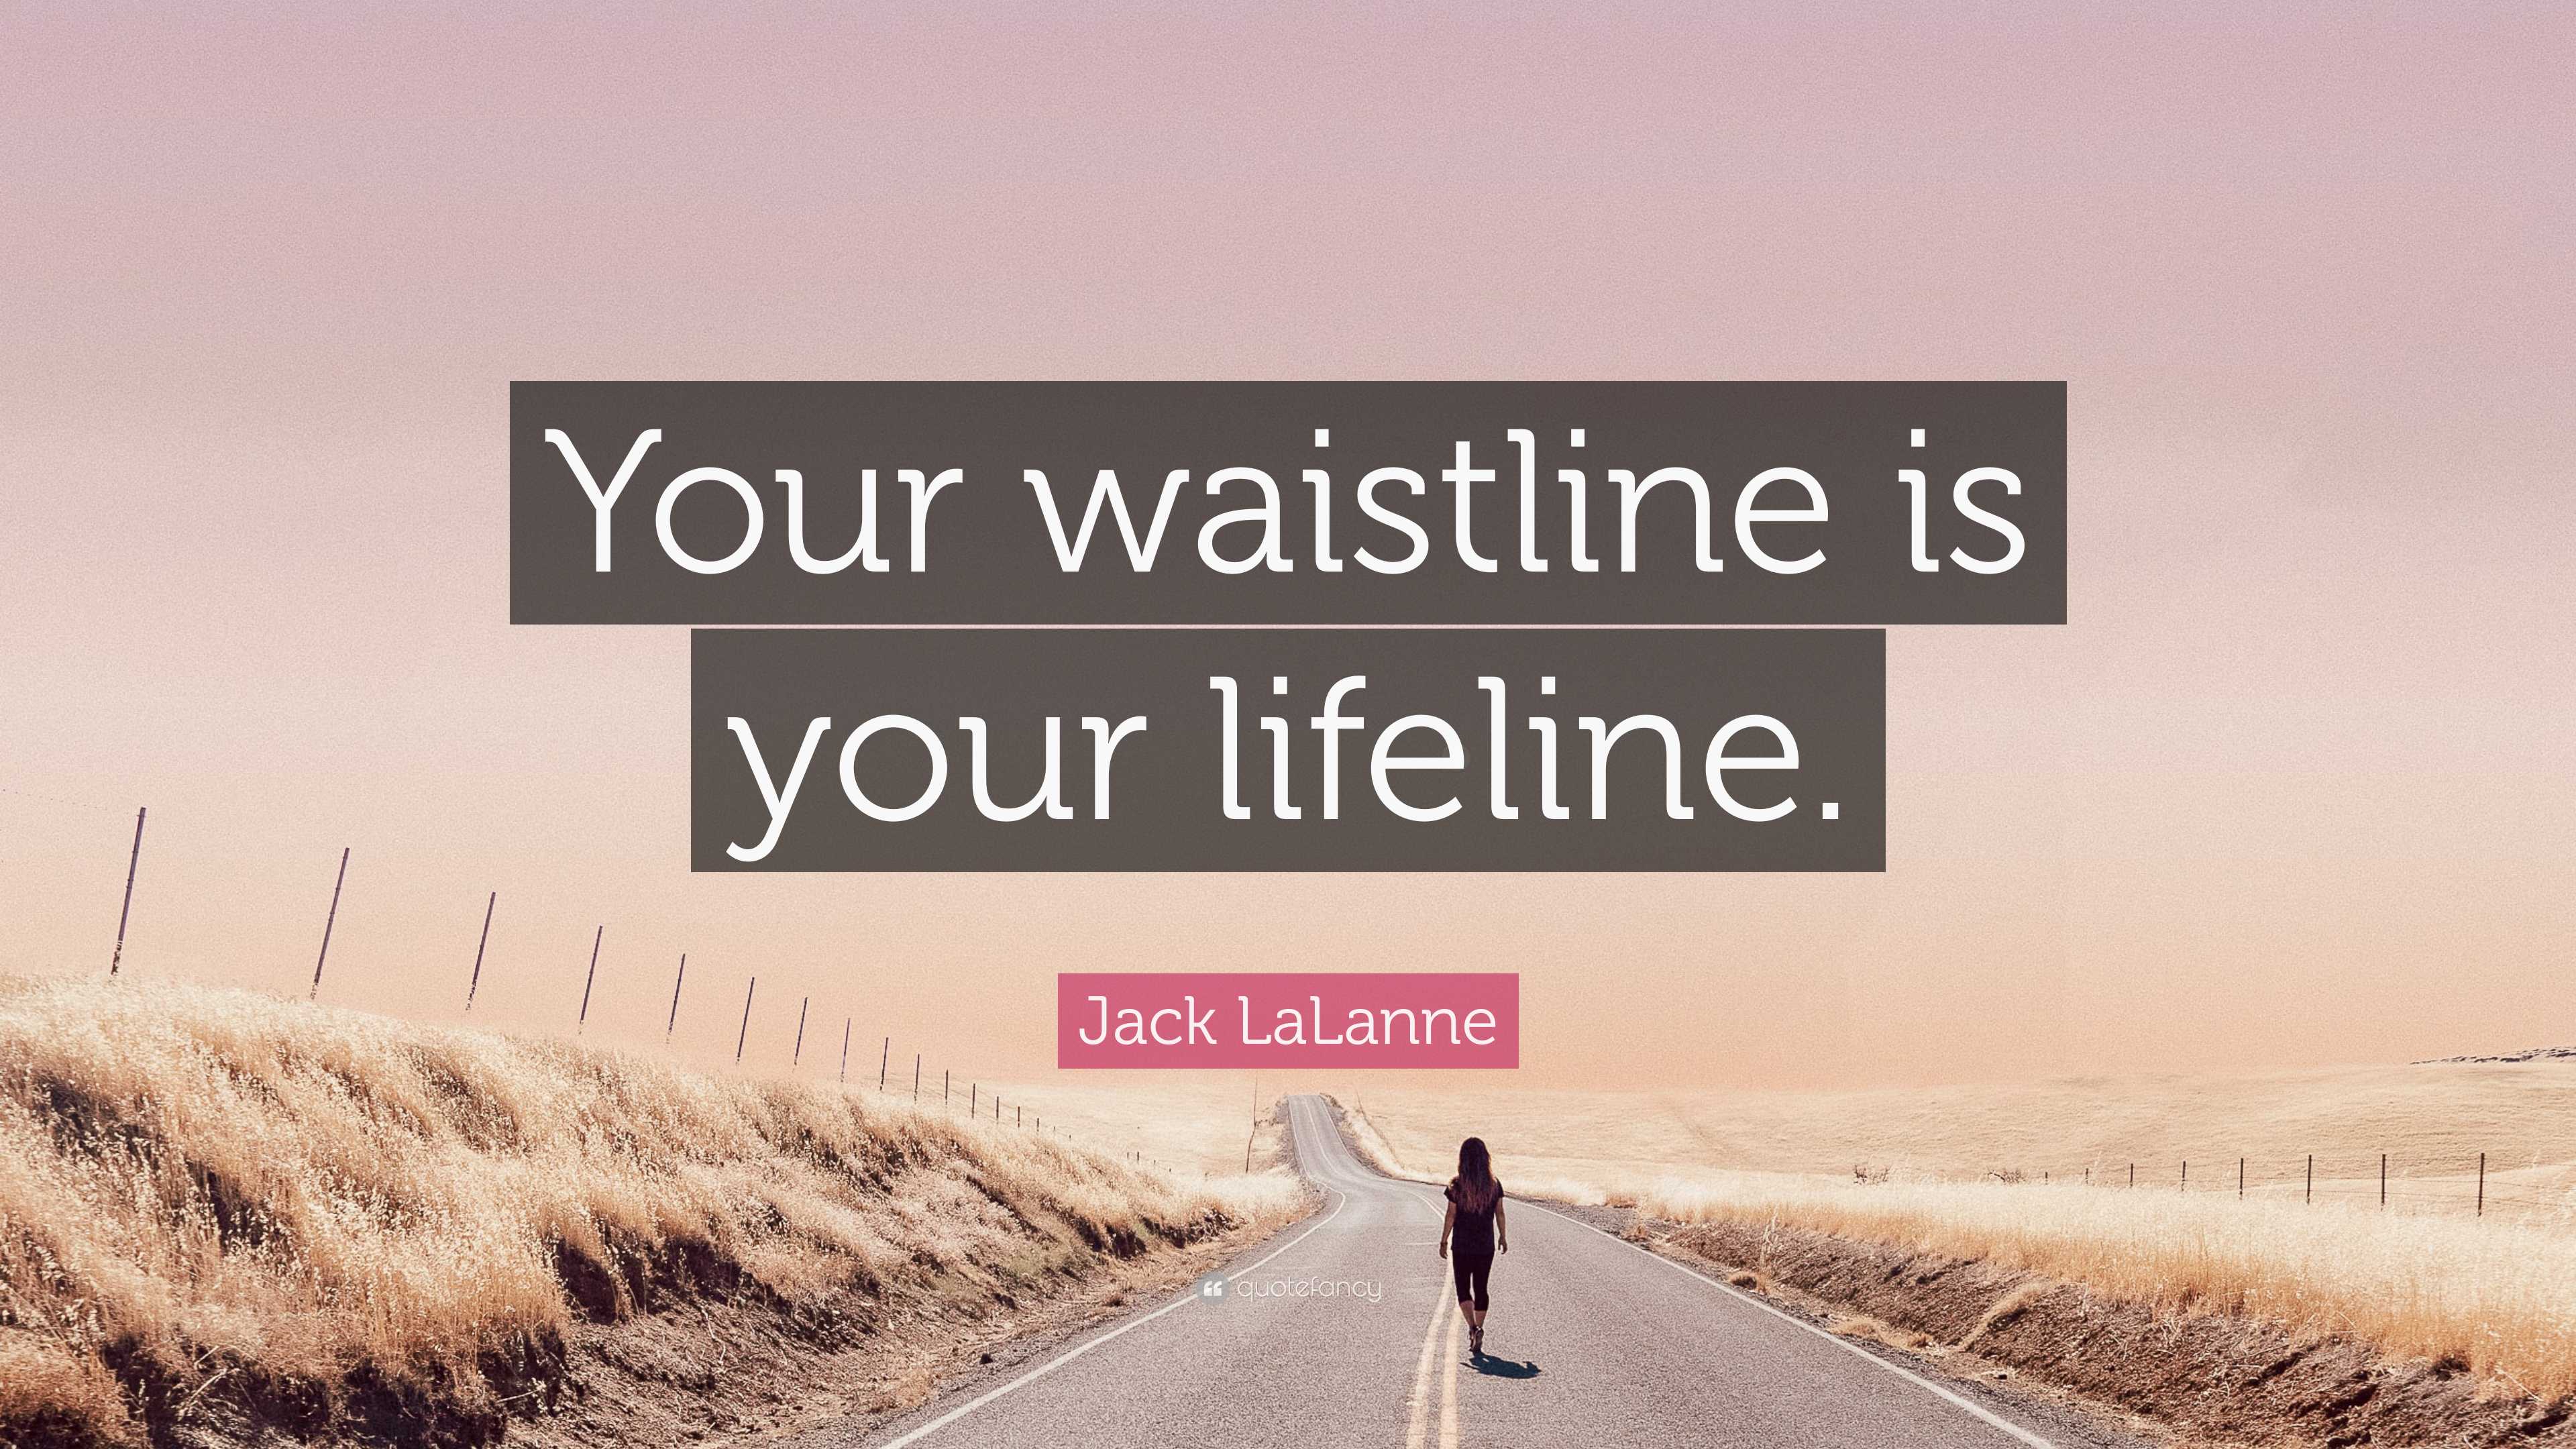 Your Waistline Is Your Lifeline: Your Waist Size Is Actually Even